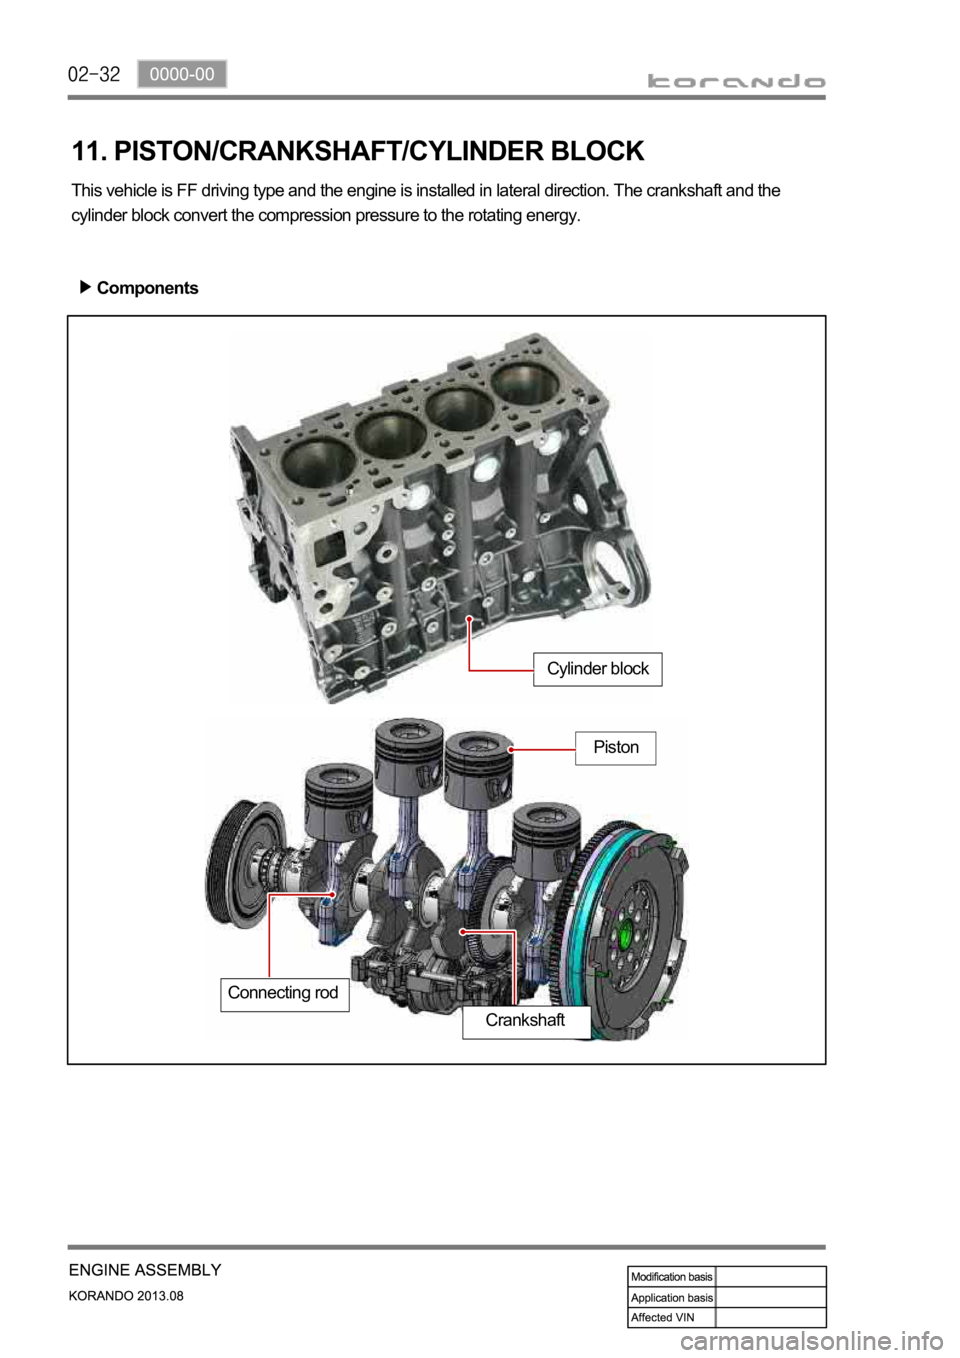 SSANGYONG KORANDO 2013  Service Manual 11. PISTON/CRANKSHAFT/CYLINDER BLOCK
This vehicle is FF driving type and the engine is installed in lateral direction. The crankshaft and the 
cylinder block convert the compression pressure to the ro